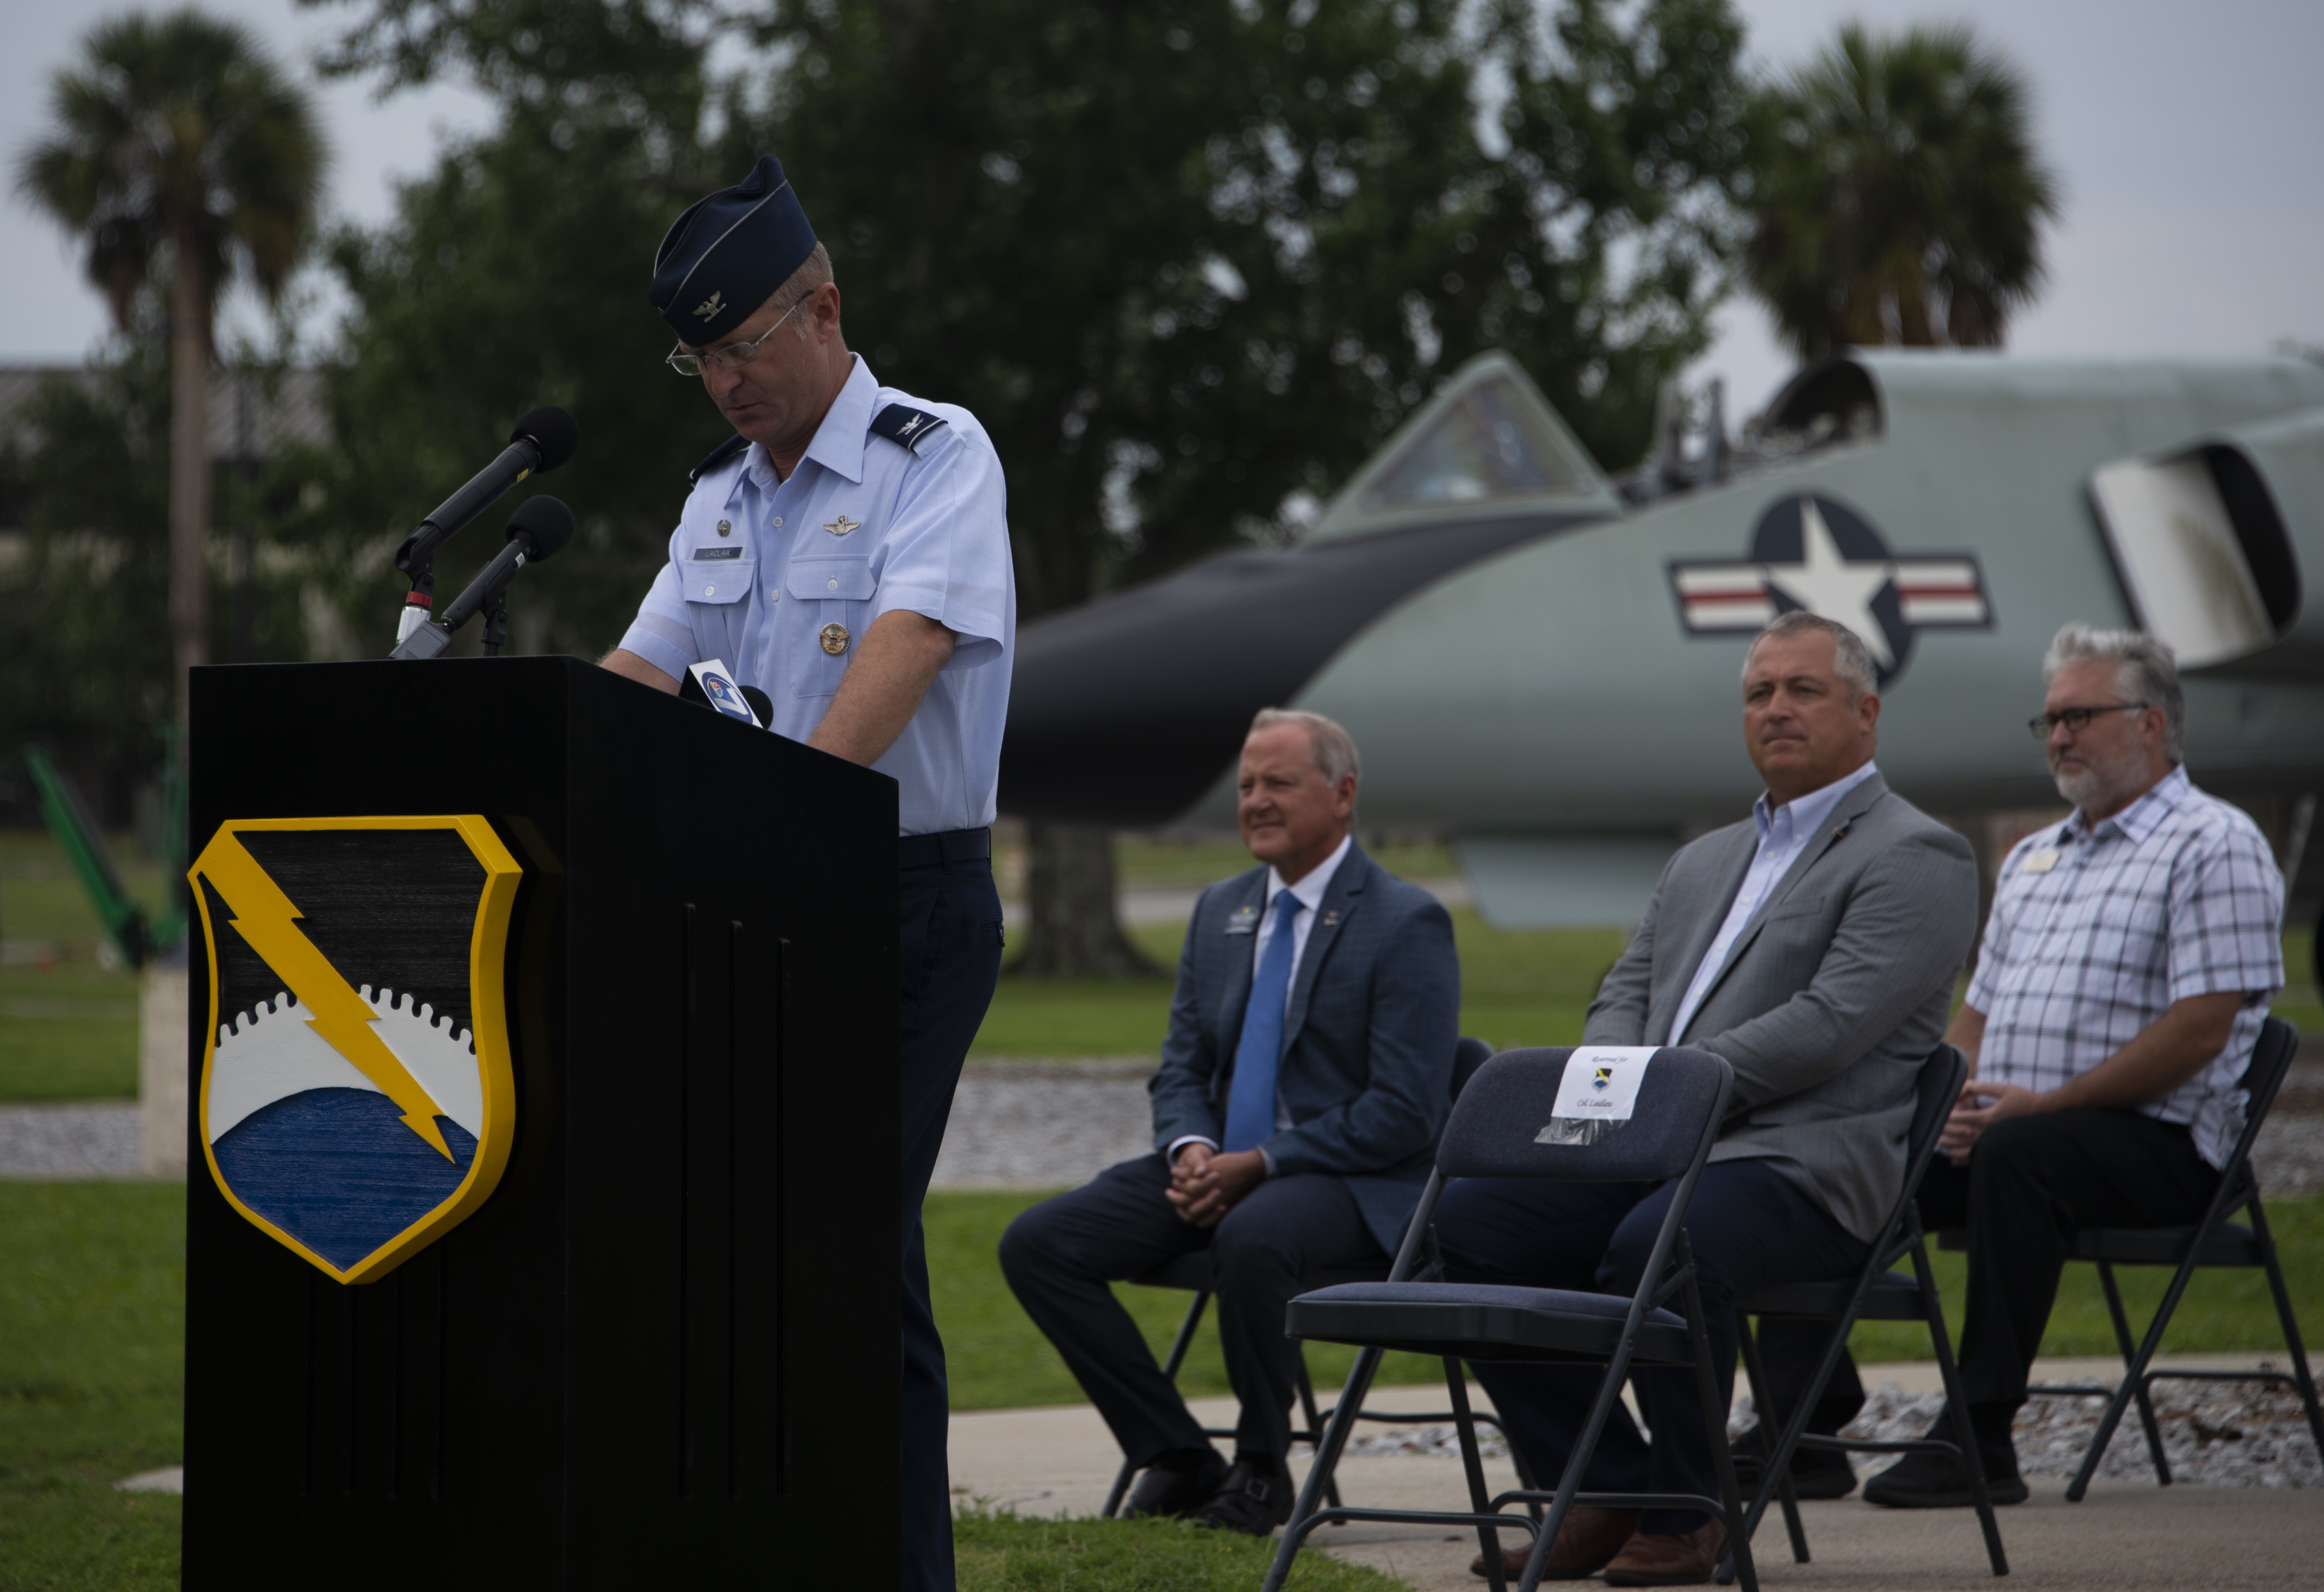 Leaders gather to recognize collaborations between Tyndall AFB and the surrounding community